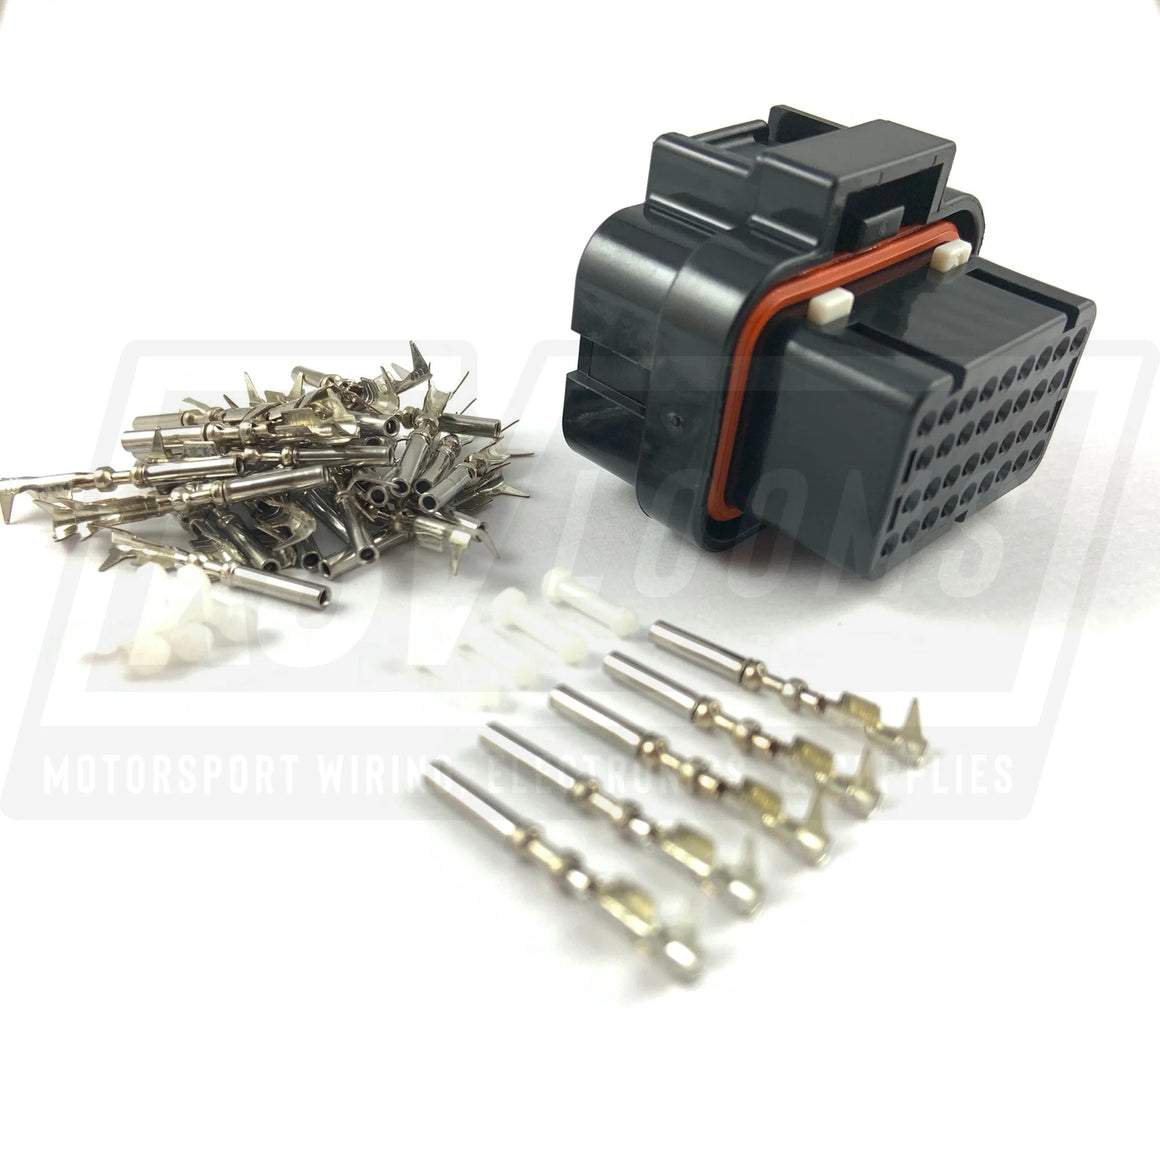 34-Way Connector Kit For Fueltech Ft600 Ecu (Connector A) (24-20 Awg)